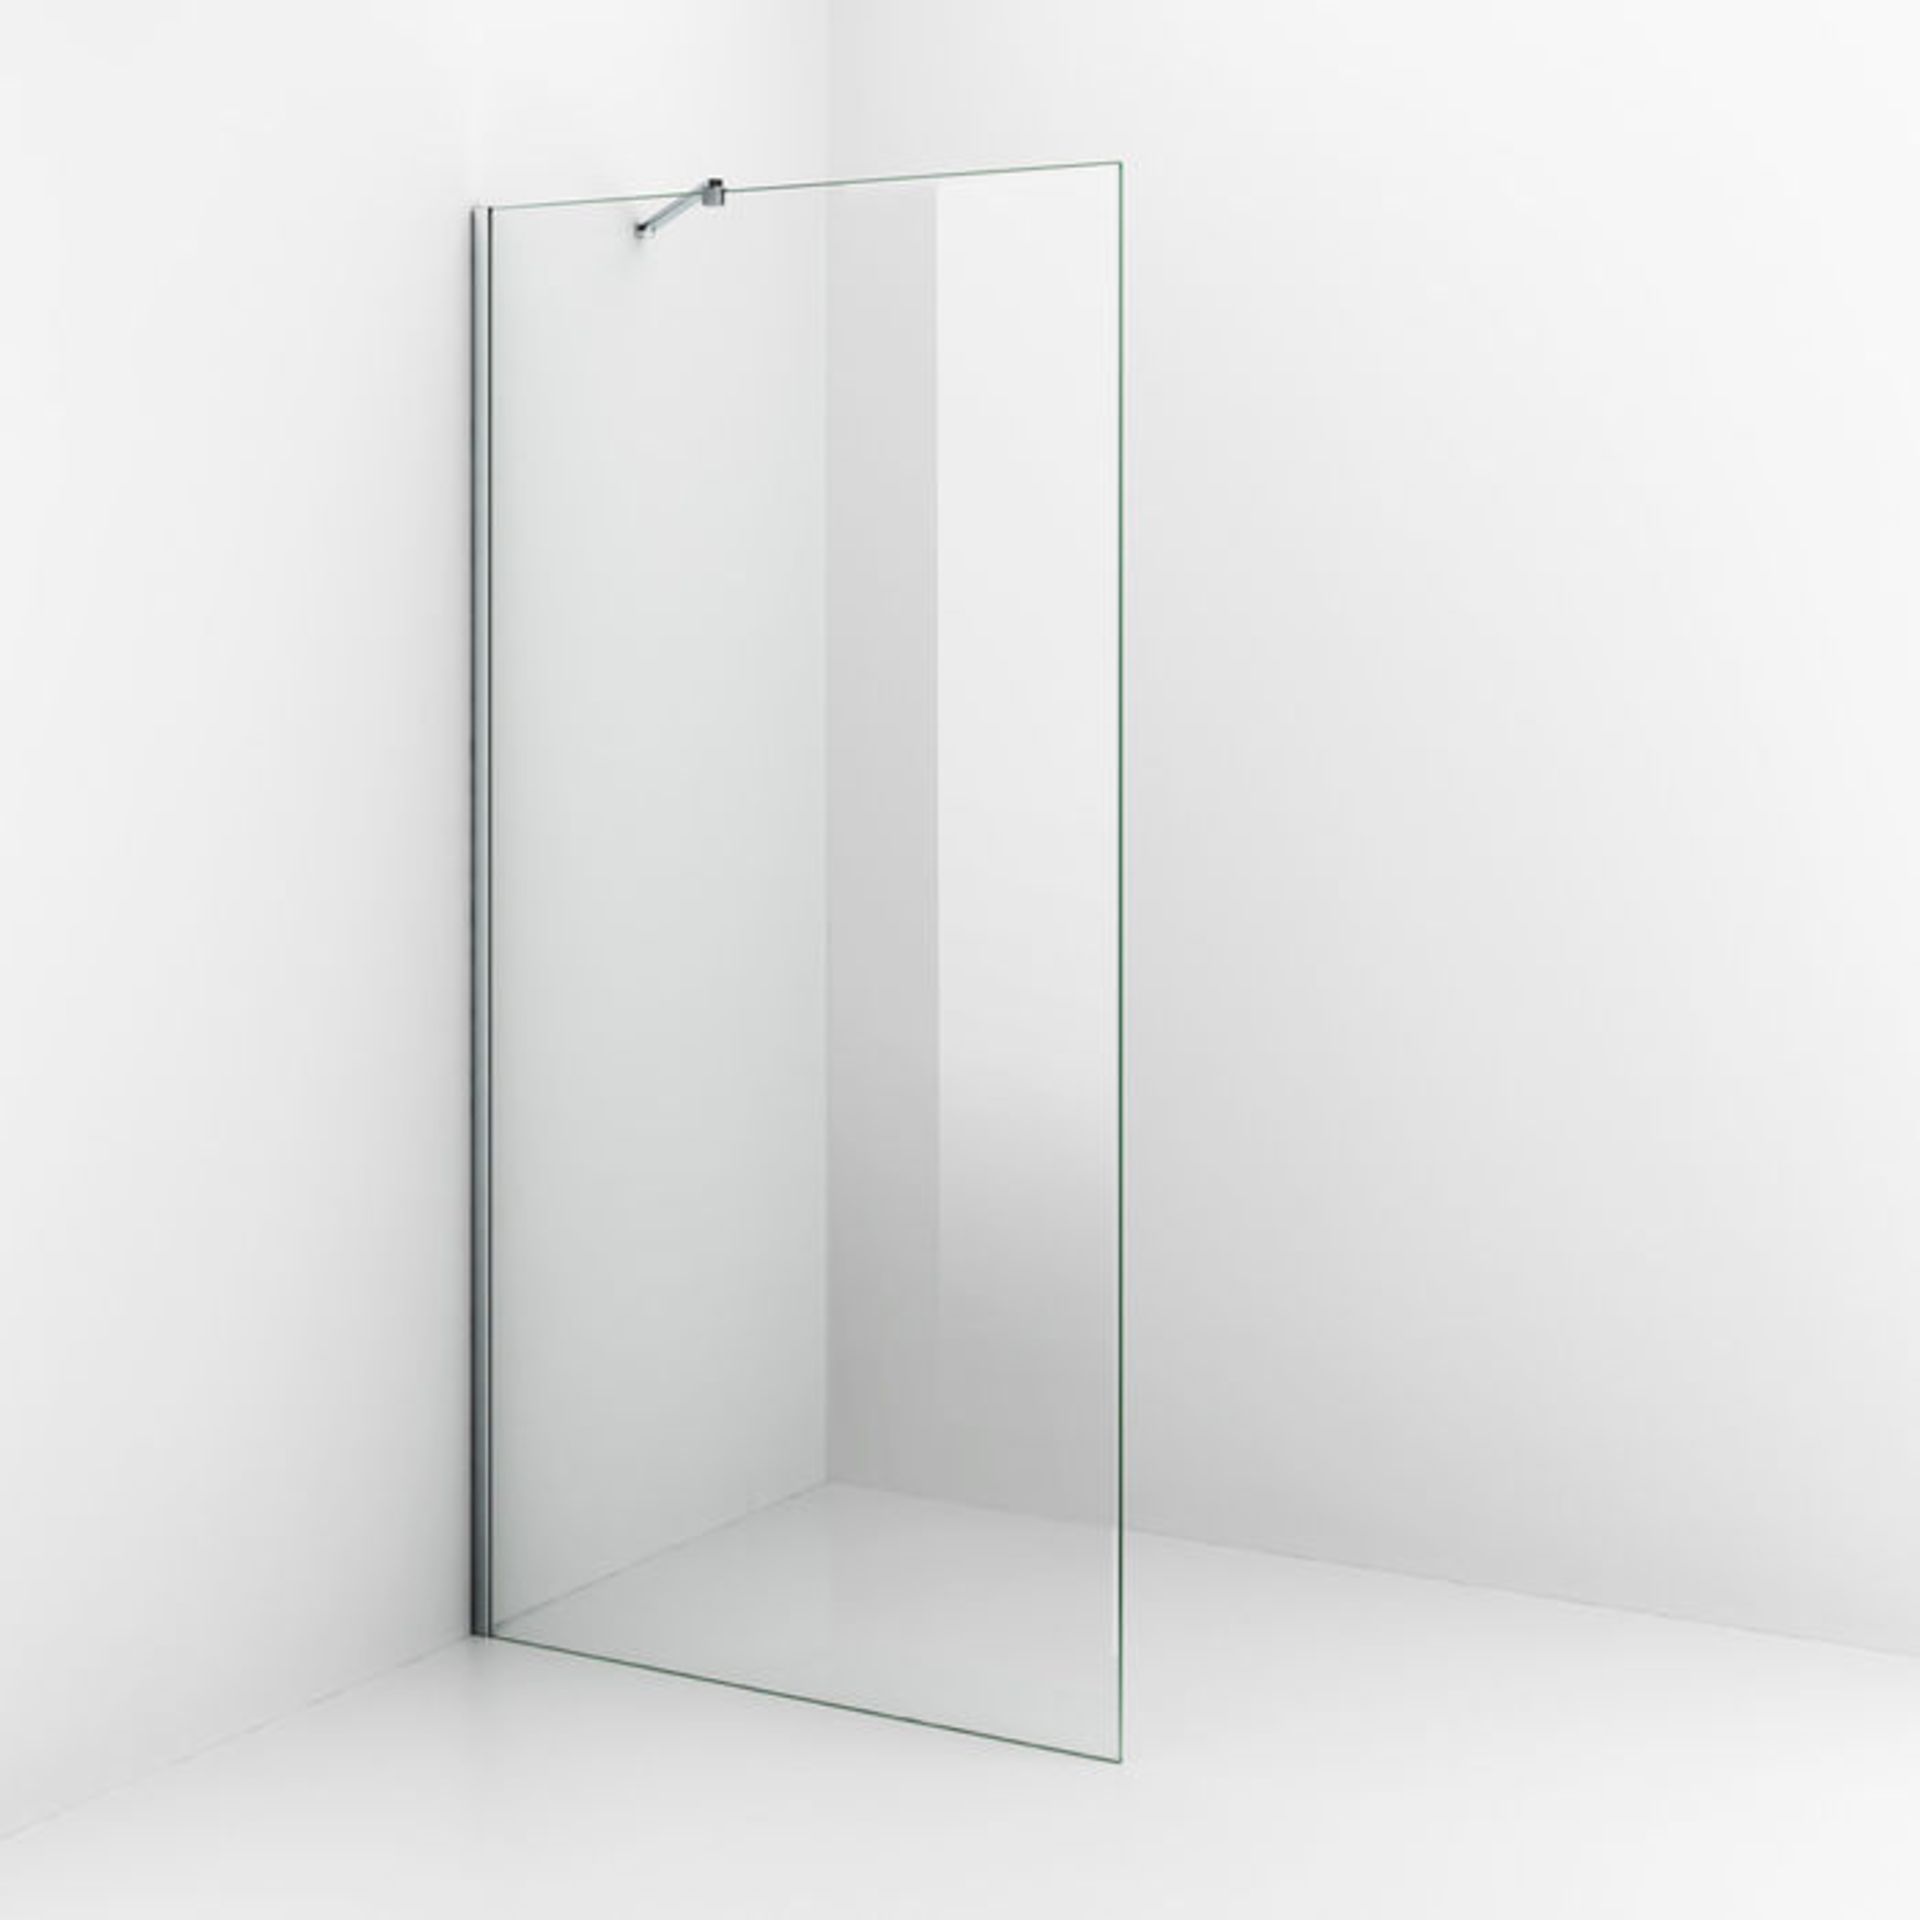 New (R54) 900mm - 8mm - Premium Easyclean Wetroom Panel. RRP £349.99.8mm Easyclean Glass - Our... - Image 3 of 4